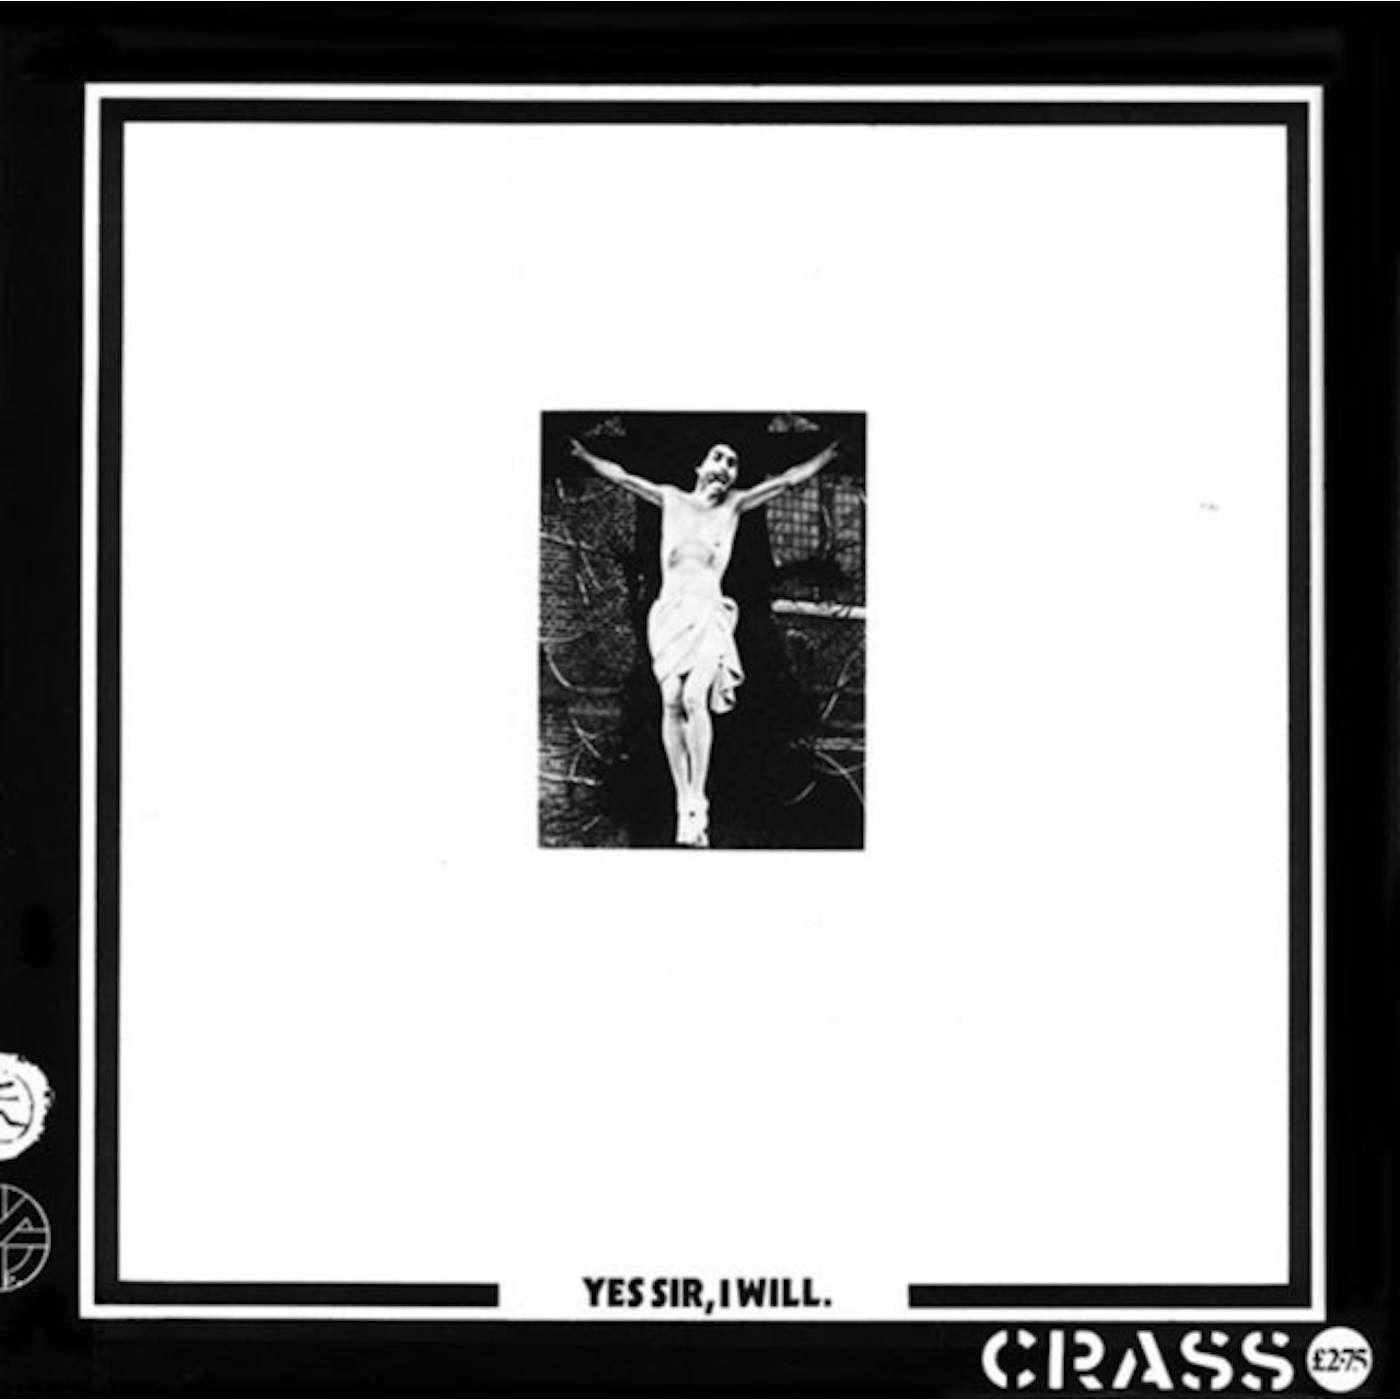 Crass CD - Yes Sir I Will